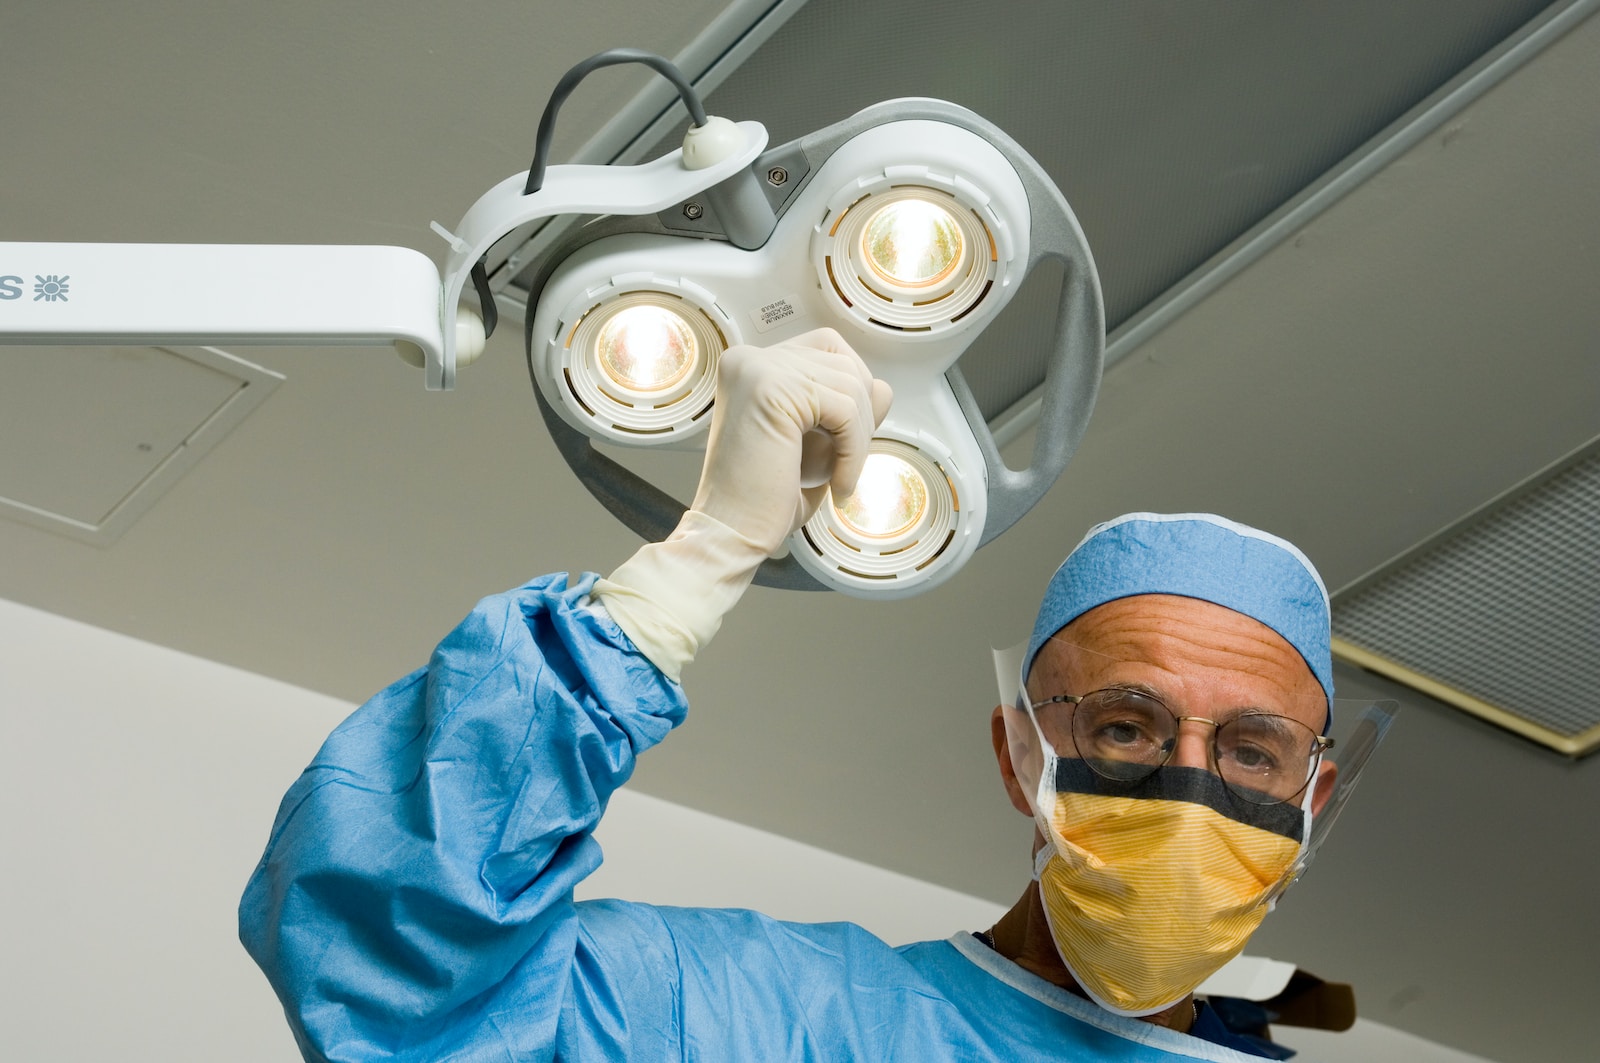 Understanding TIAs, a man in a surgical gown holding up a surgical light